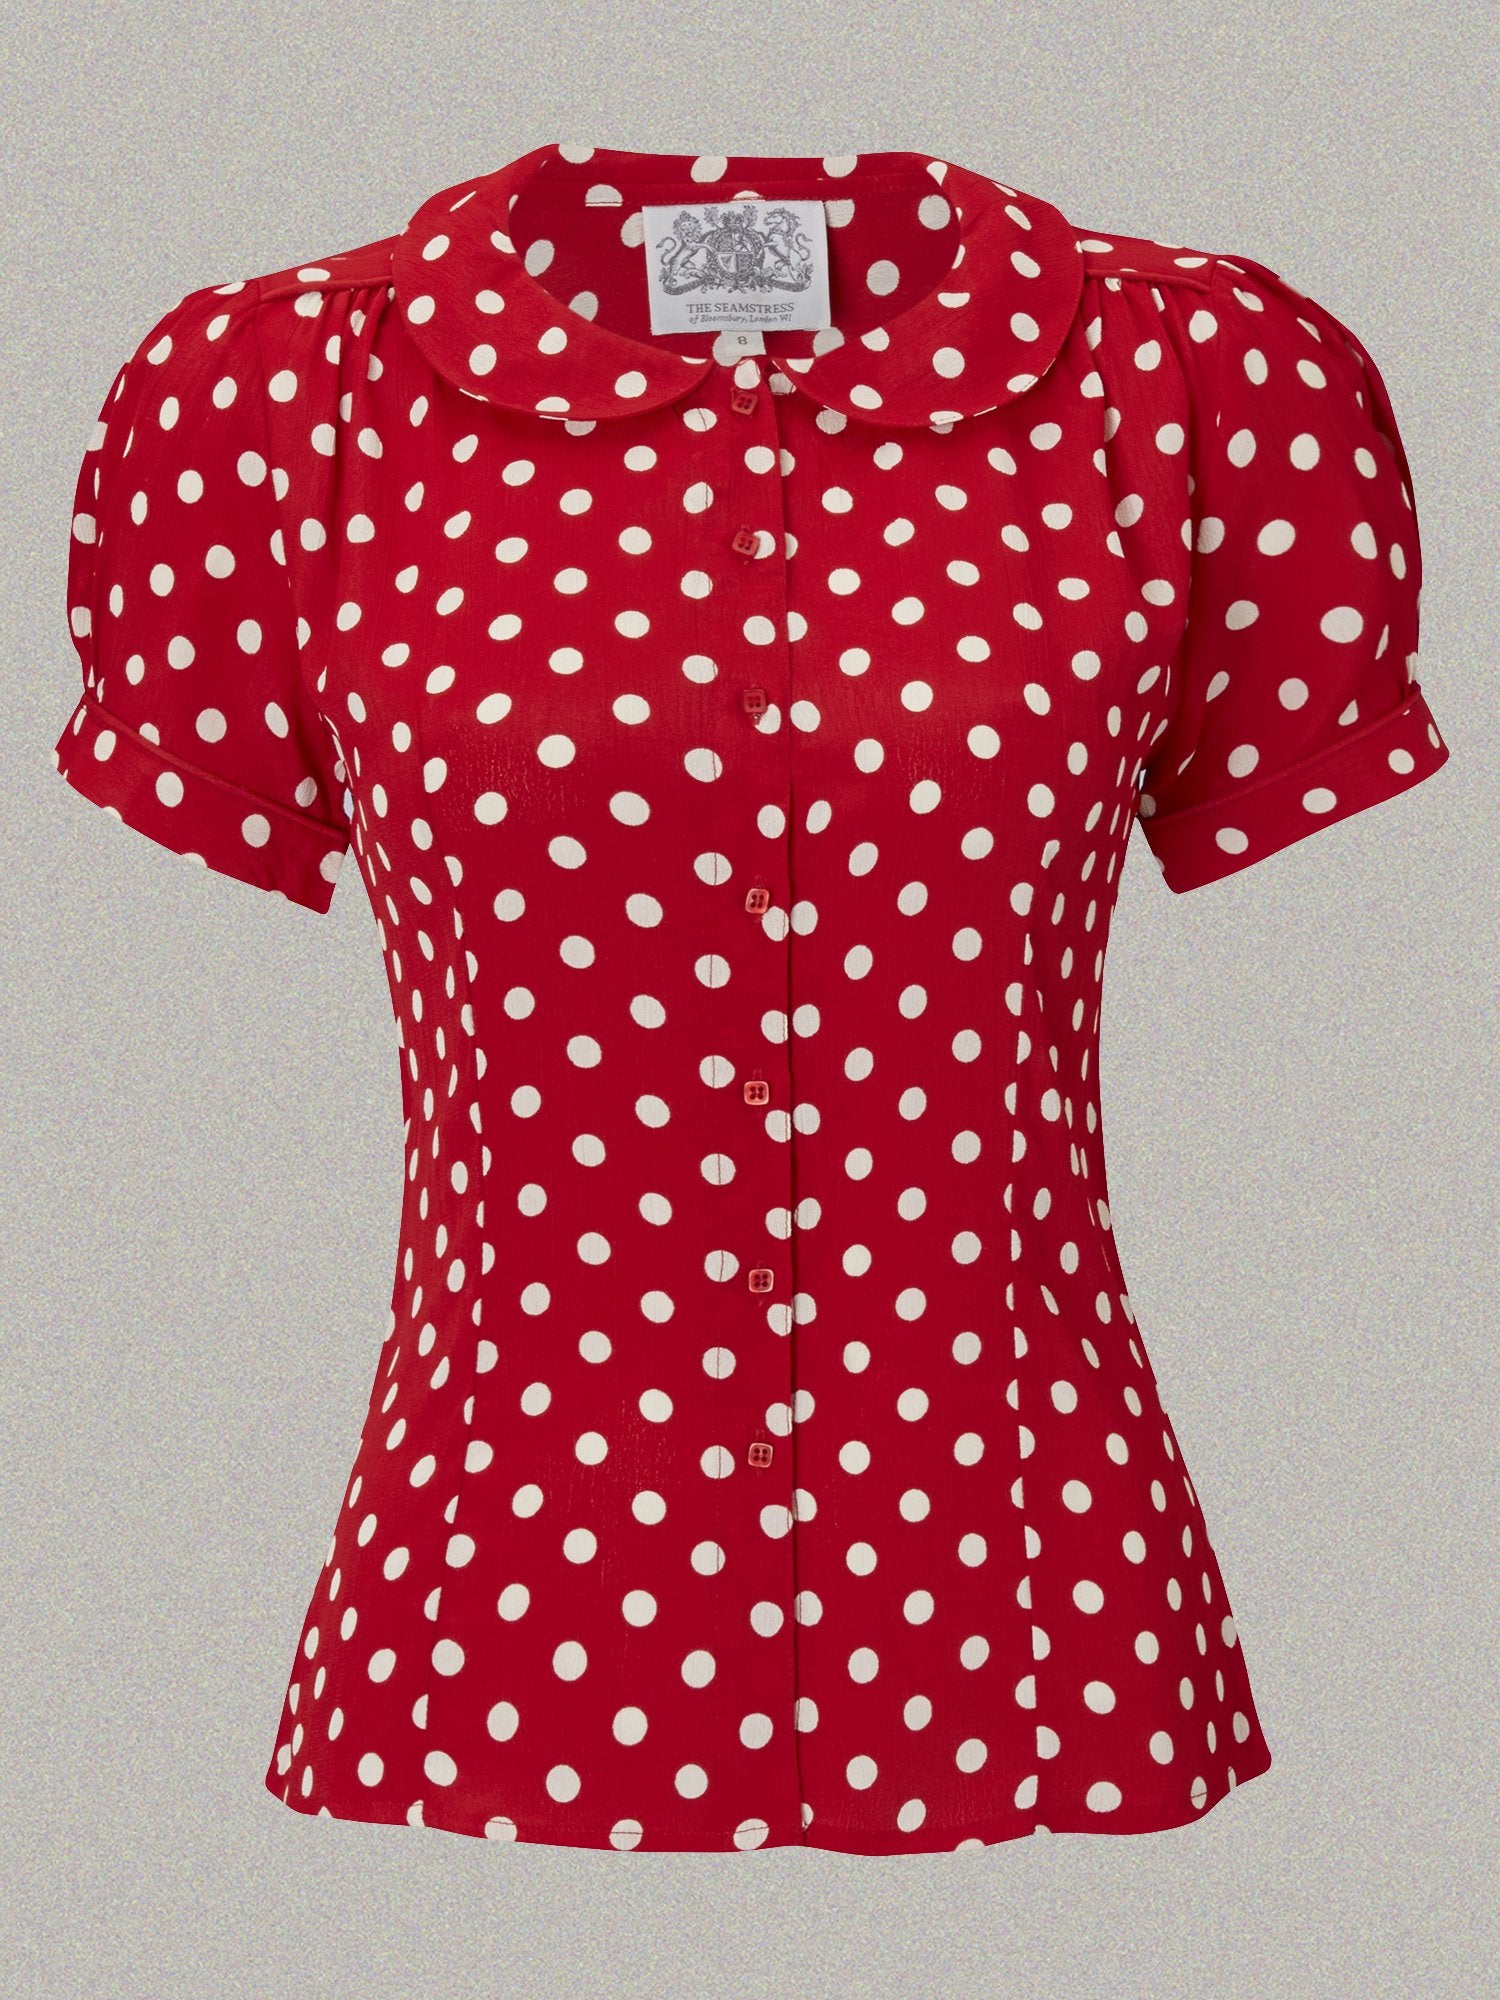 50s Shirts & Tops | 1950s Blouses & Knitwear Jive Short Sleeve Blouse in Red with Polka Dot Spot Classic 1940s Vintage Style £39.95 AT vintagedancer.com